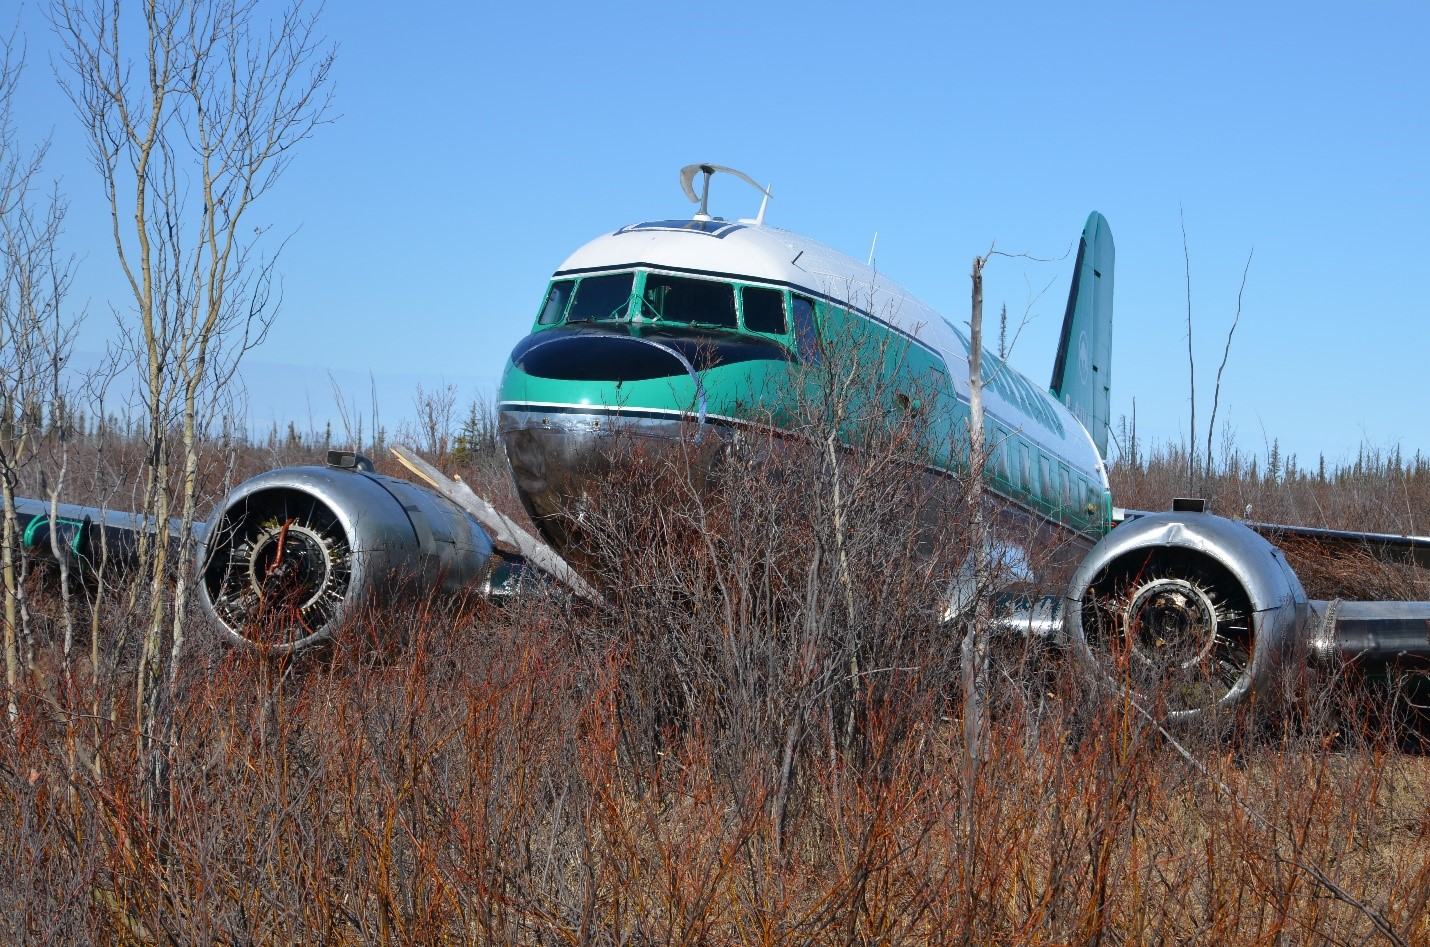 Frontal view of the aircraft outside of Hay River, NWT